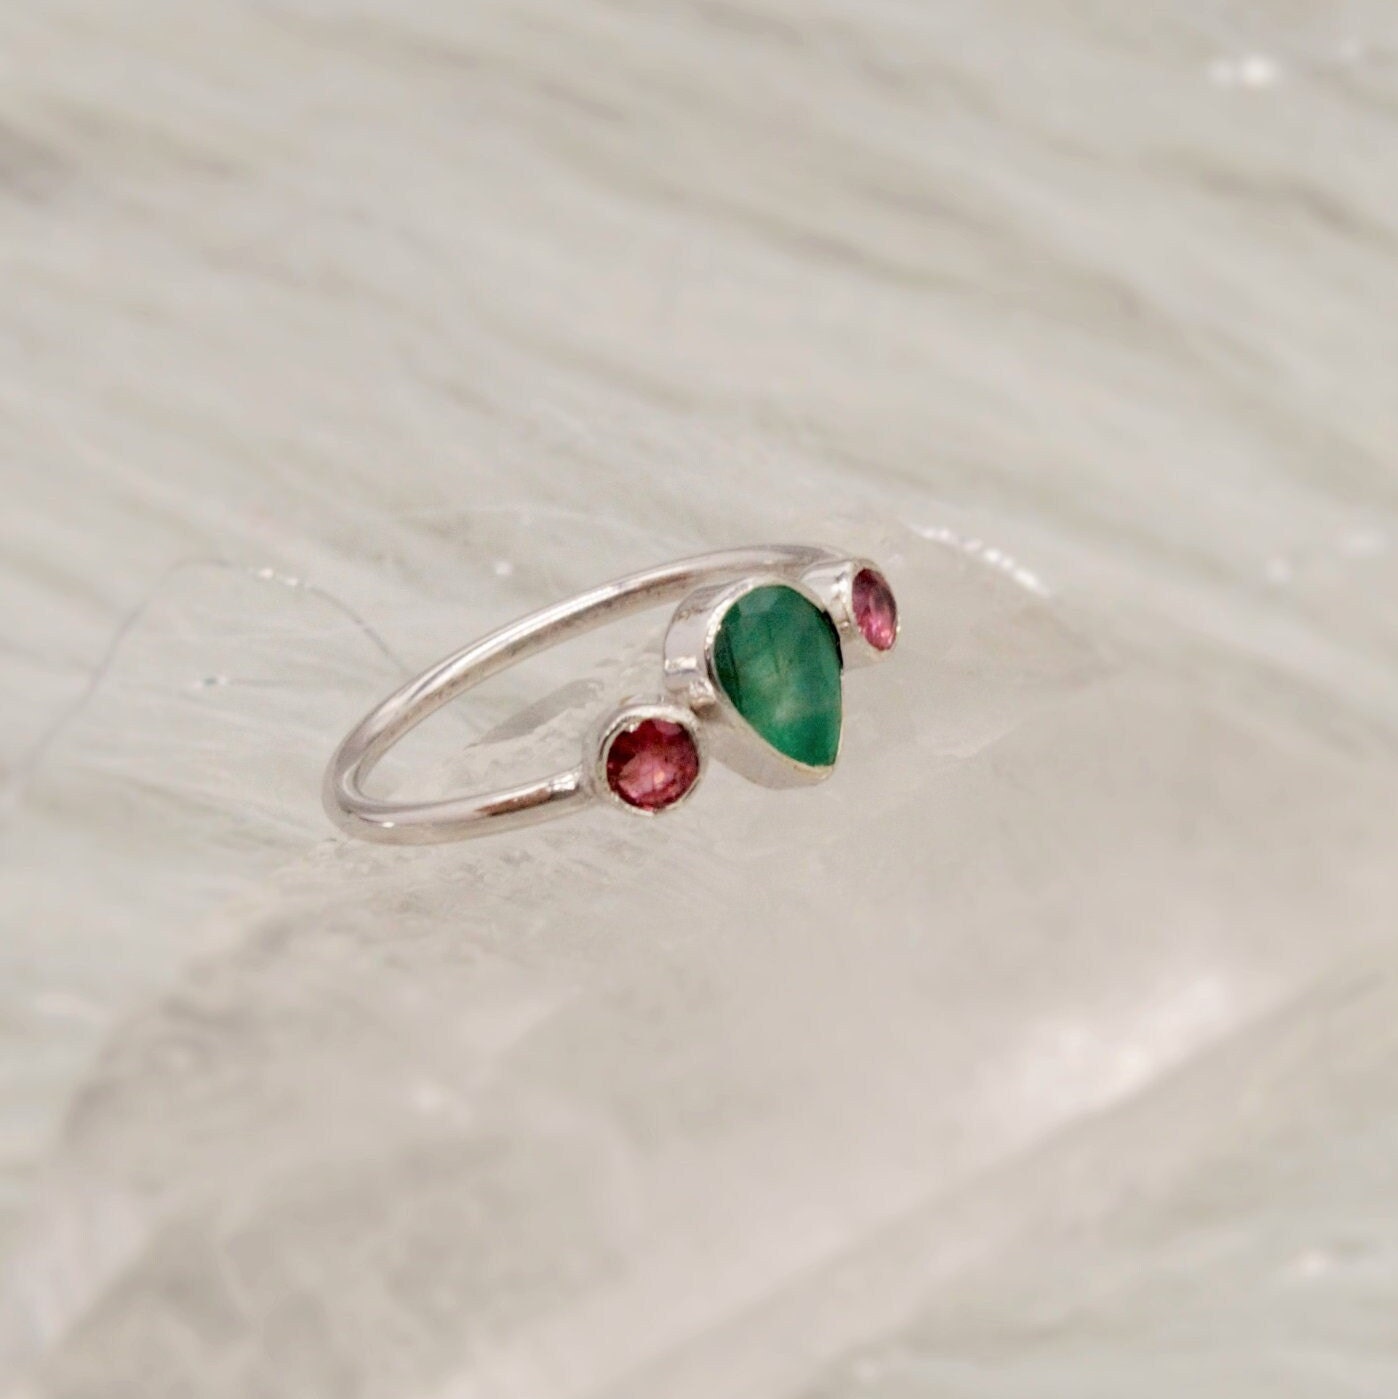 Pink Tourmaline, Emerald Silver Ring, Sterling Silver Emerald Jewelry, May, October Birthstone Ring, Stackable Rings For Women